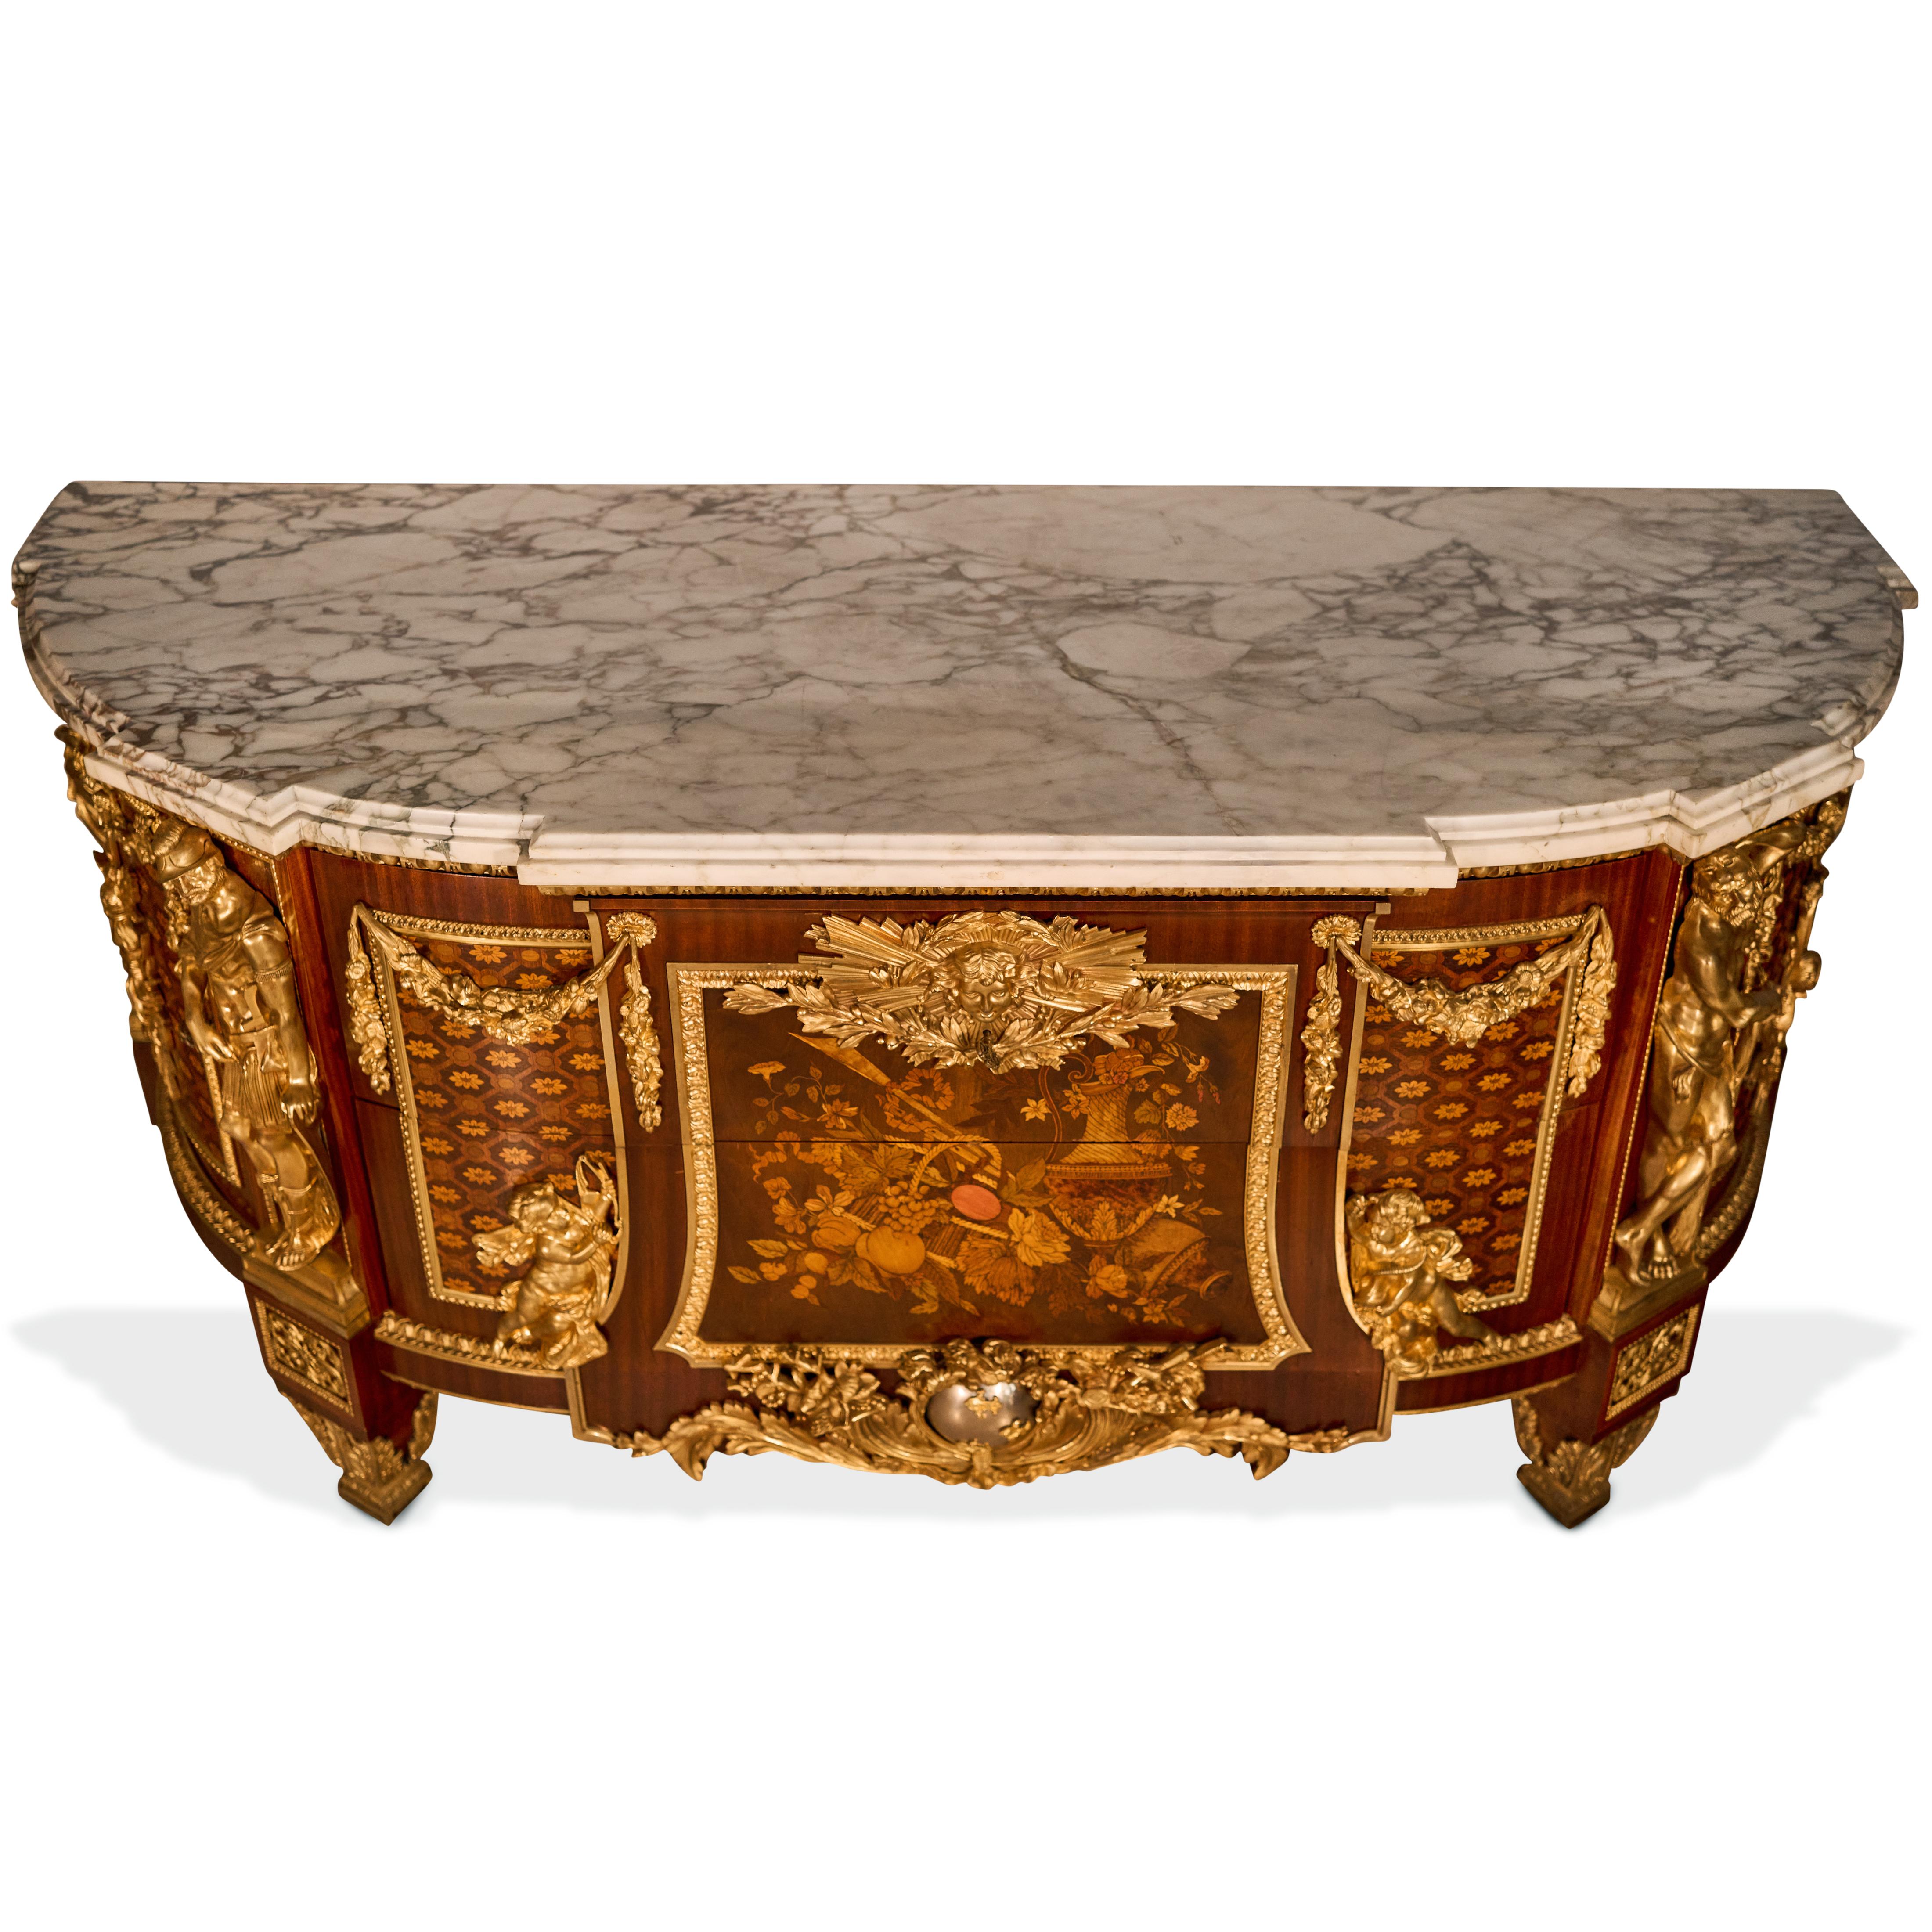 A Superb 19th century French Louis XVI style gilt- bronze mahogany, kingwood and fruitwood marquetry armorial commode with Sycamore Marquetry and magnificent quality gilt bronze mounts. (Please view the detail photos for quality of bronze and